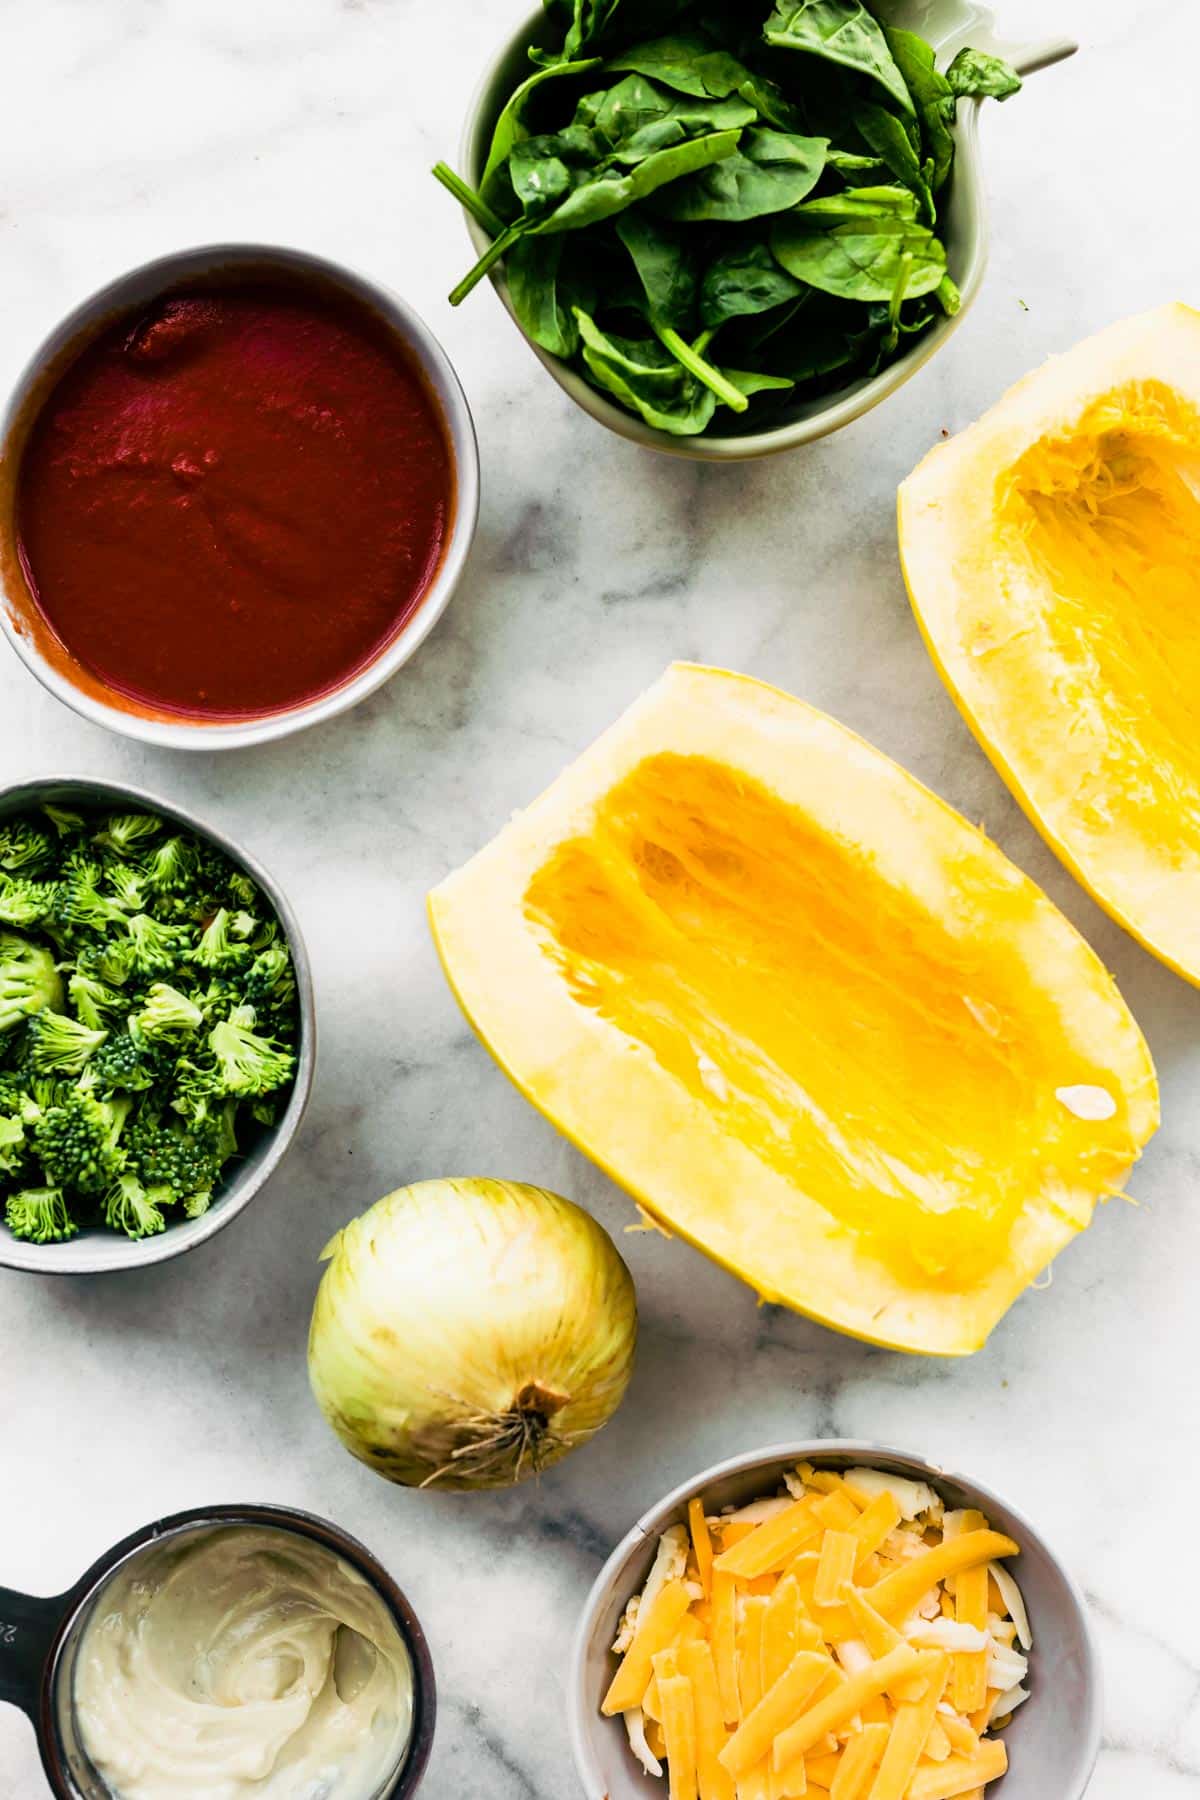 Halved spaghetti squash, marinara sauce, spinach and other ingredients on a white marble countertop.